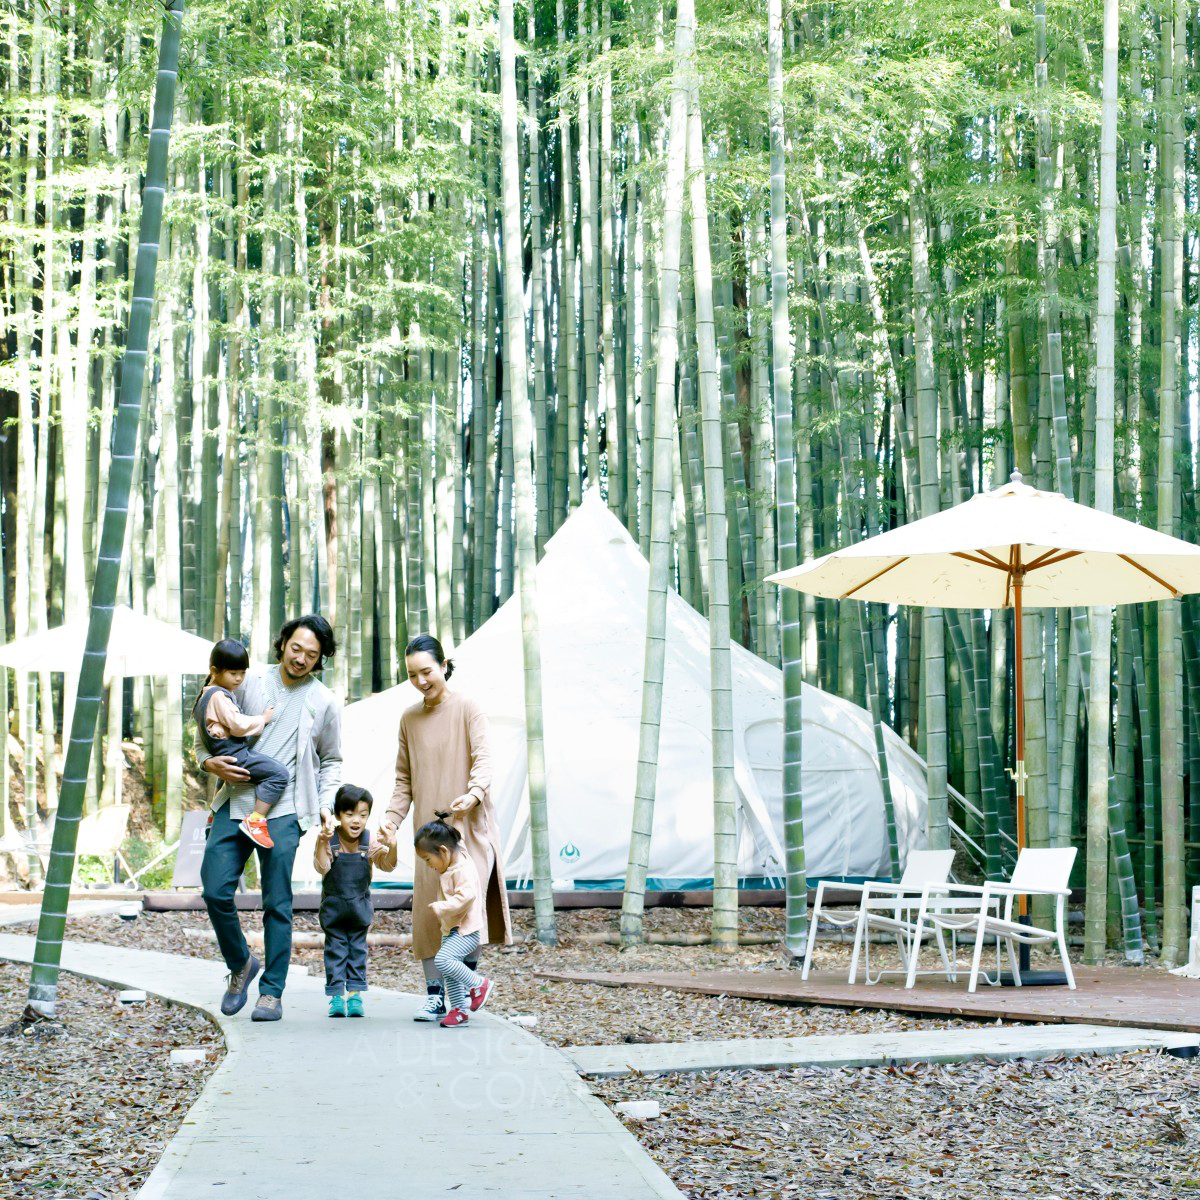 The Bamboo Forest <b>Simple Lodging